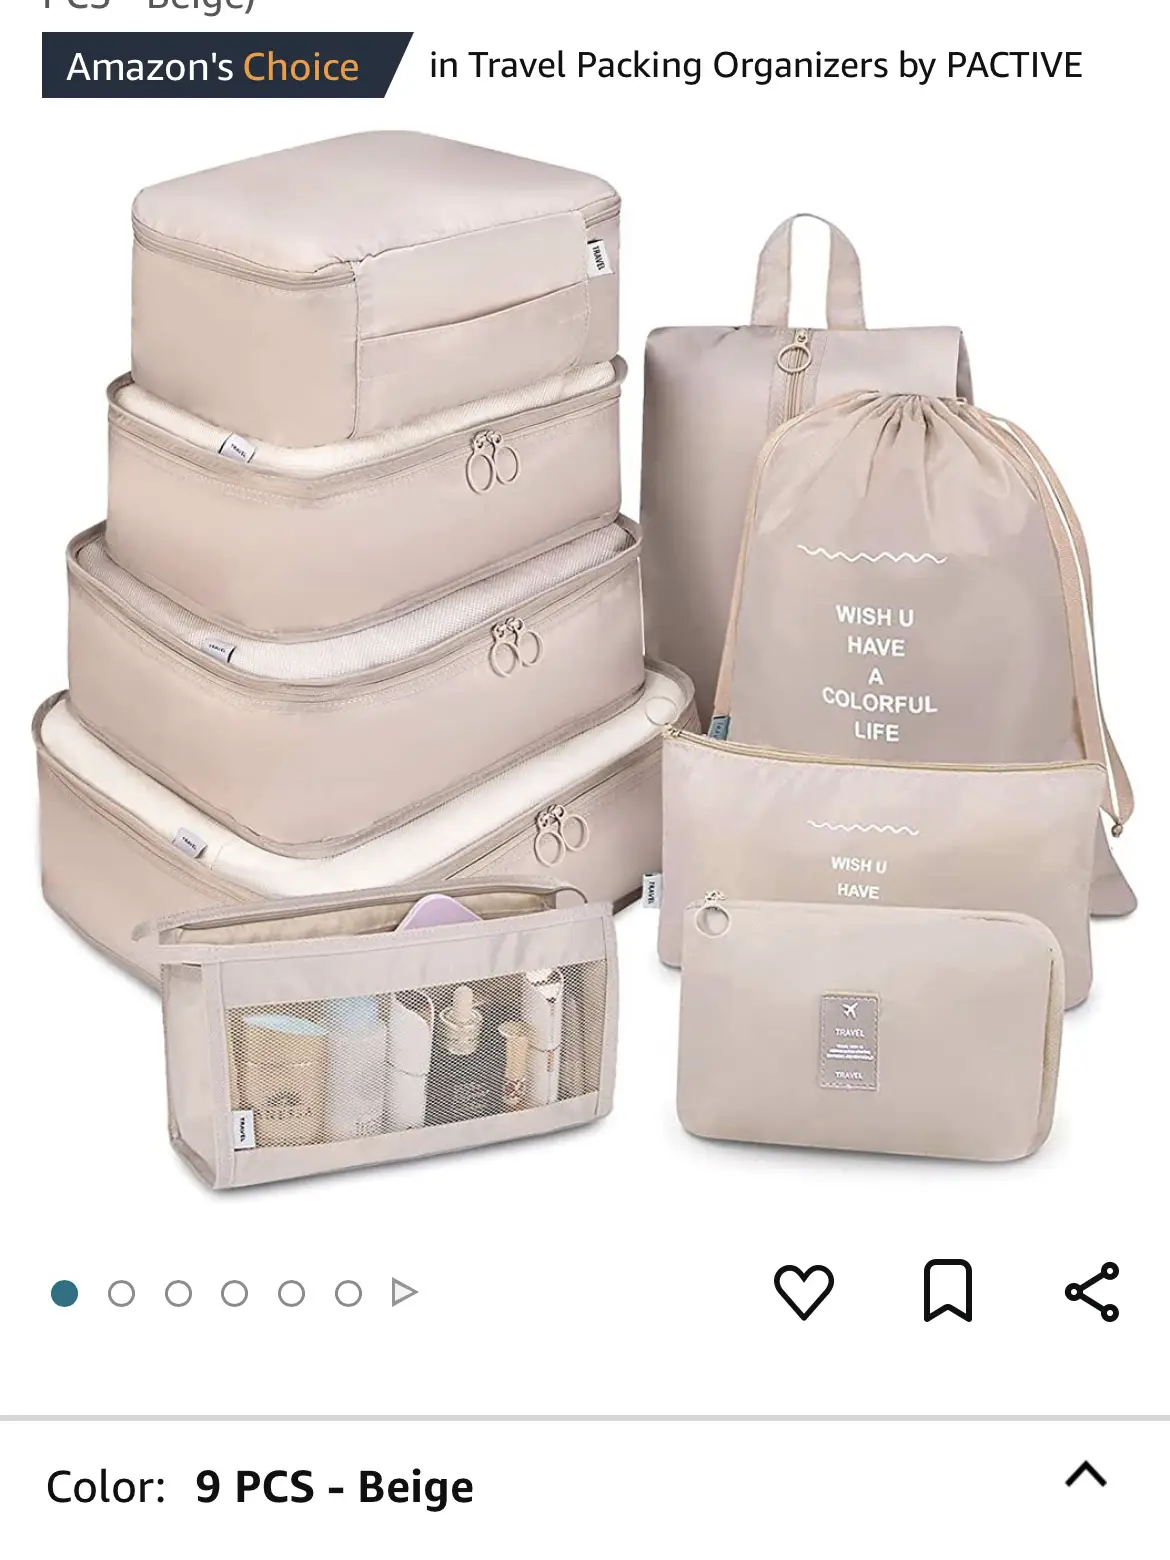 I've been using this for 9 months and it's been perfect! #targetfinds , Organization